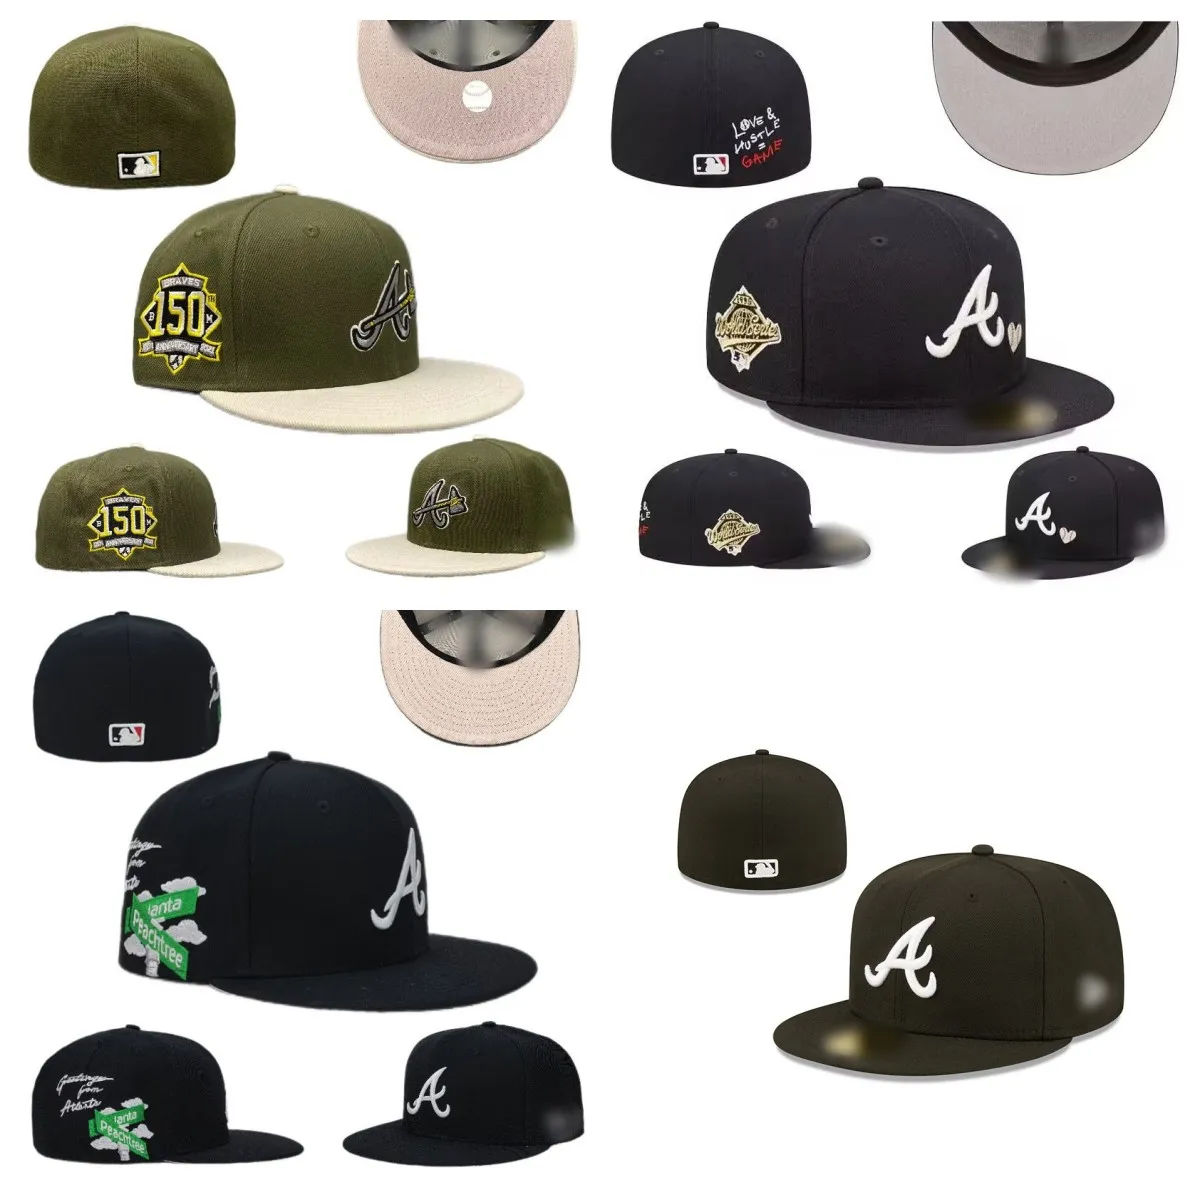 Top Selling Accessories Hot Ball Caps Embroidered A Hip Hop Size Hats Baseball Caps Adult Flat Peak For Unisex style Full Closed Fitted Caps Casual SF02